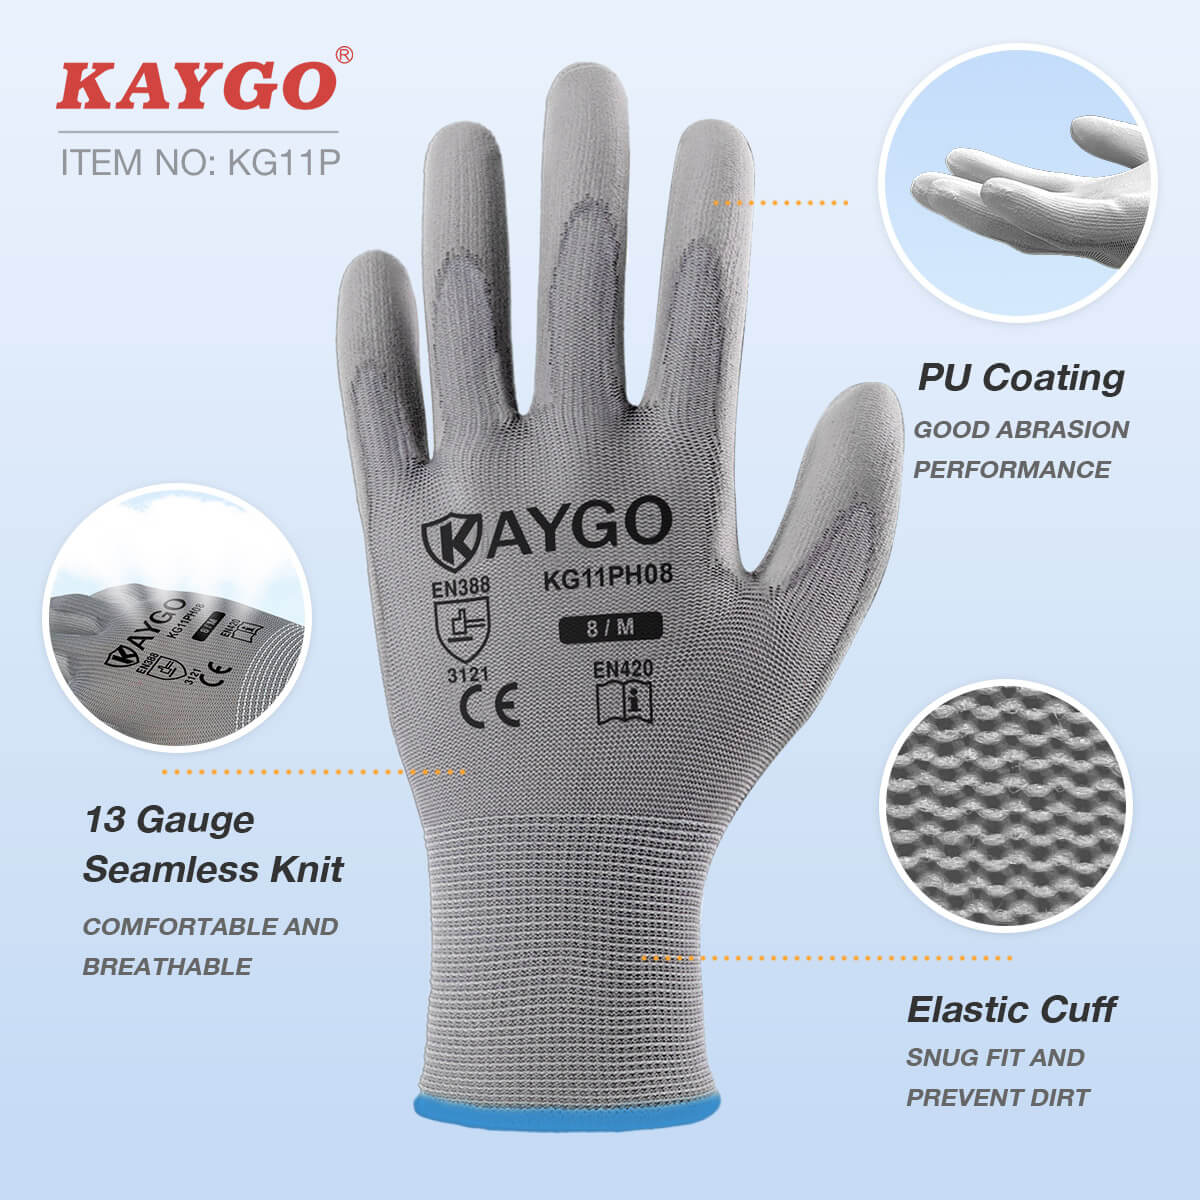 KAYGO Safety Work Gloves PU Coated-6 Pairs, KG18NB MicroFoam Nitrile Coated  Gloves & KGE19L Eco Friendly Gloves with Breathable Rubber Coated